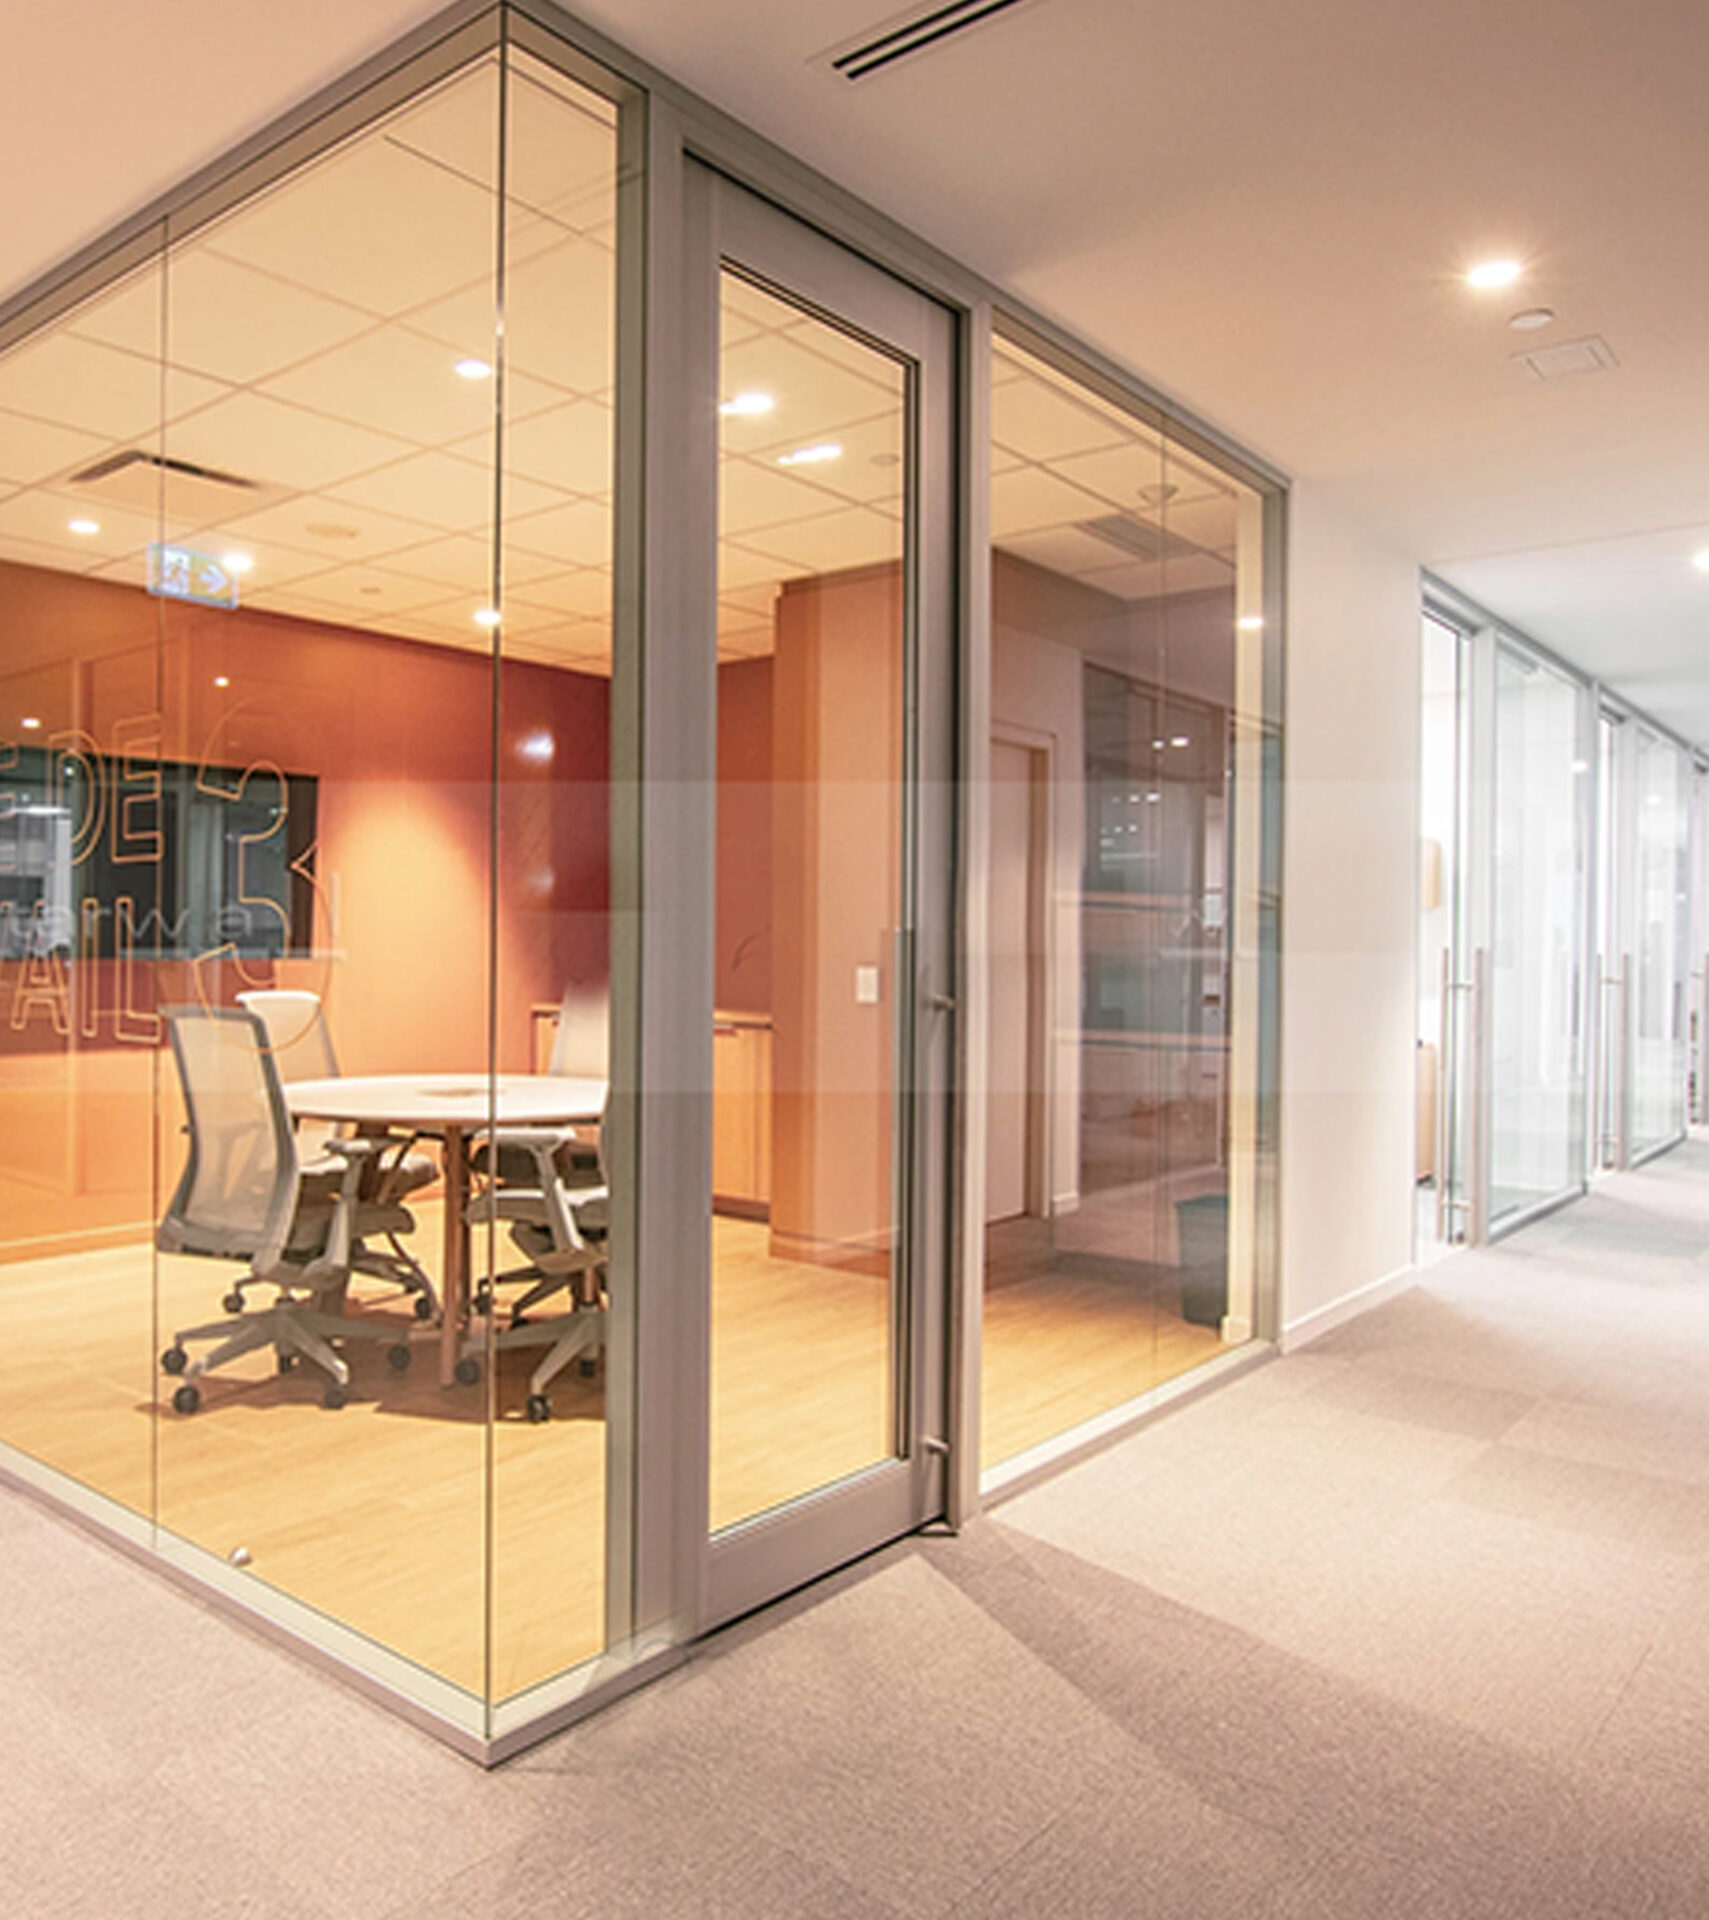 Create the new “open concept” office with Starwall integrated glass wall systems.